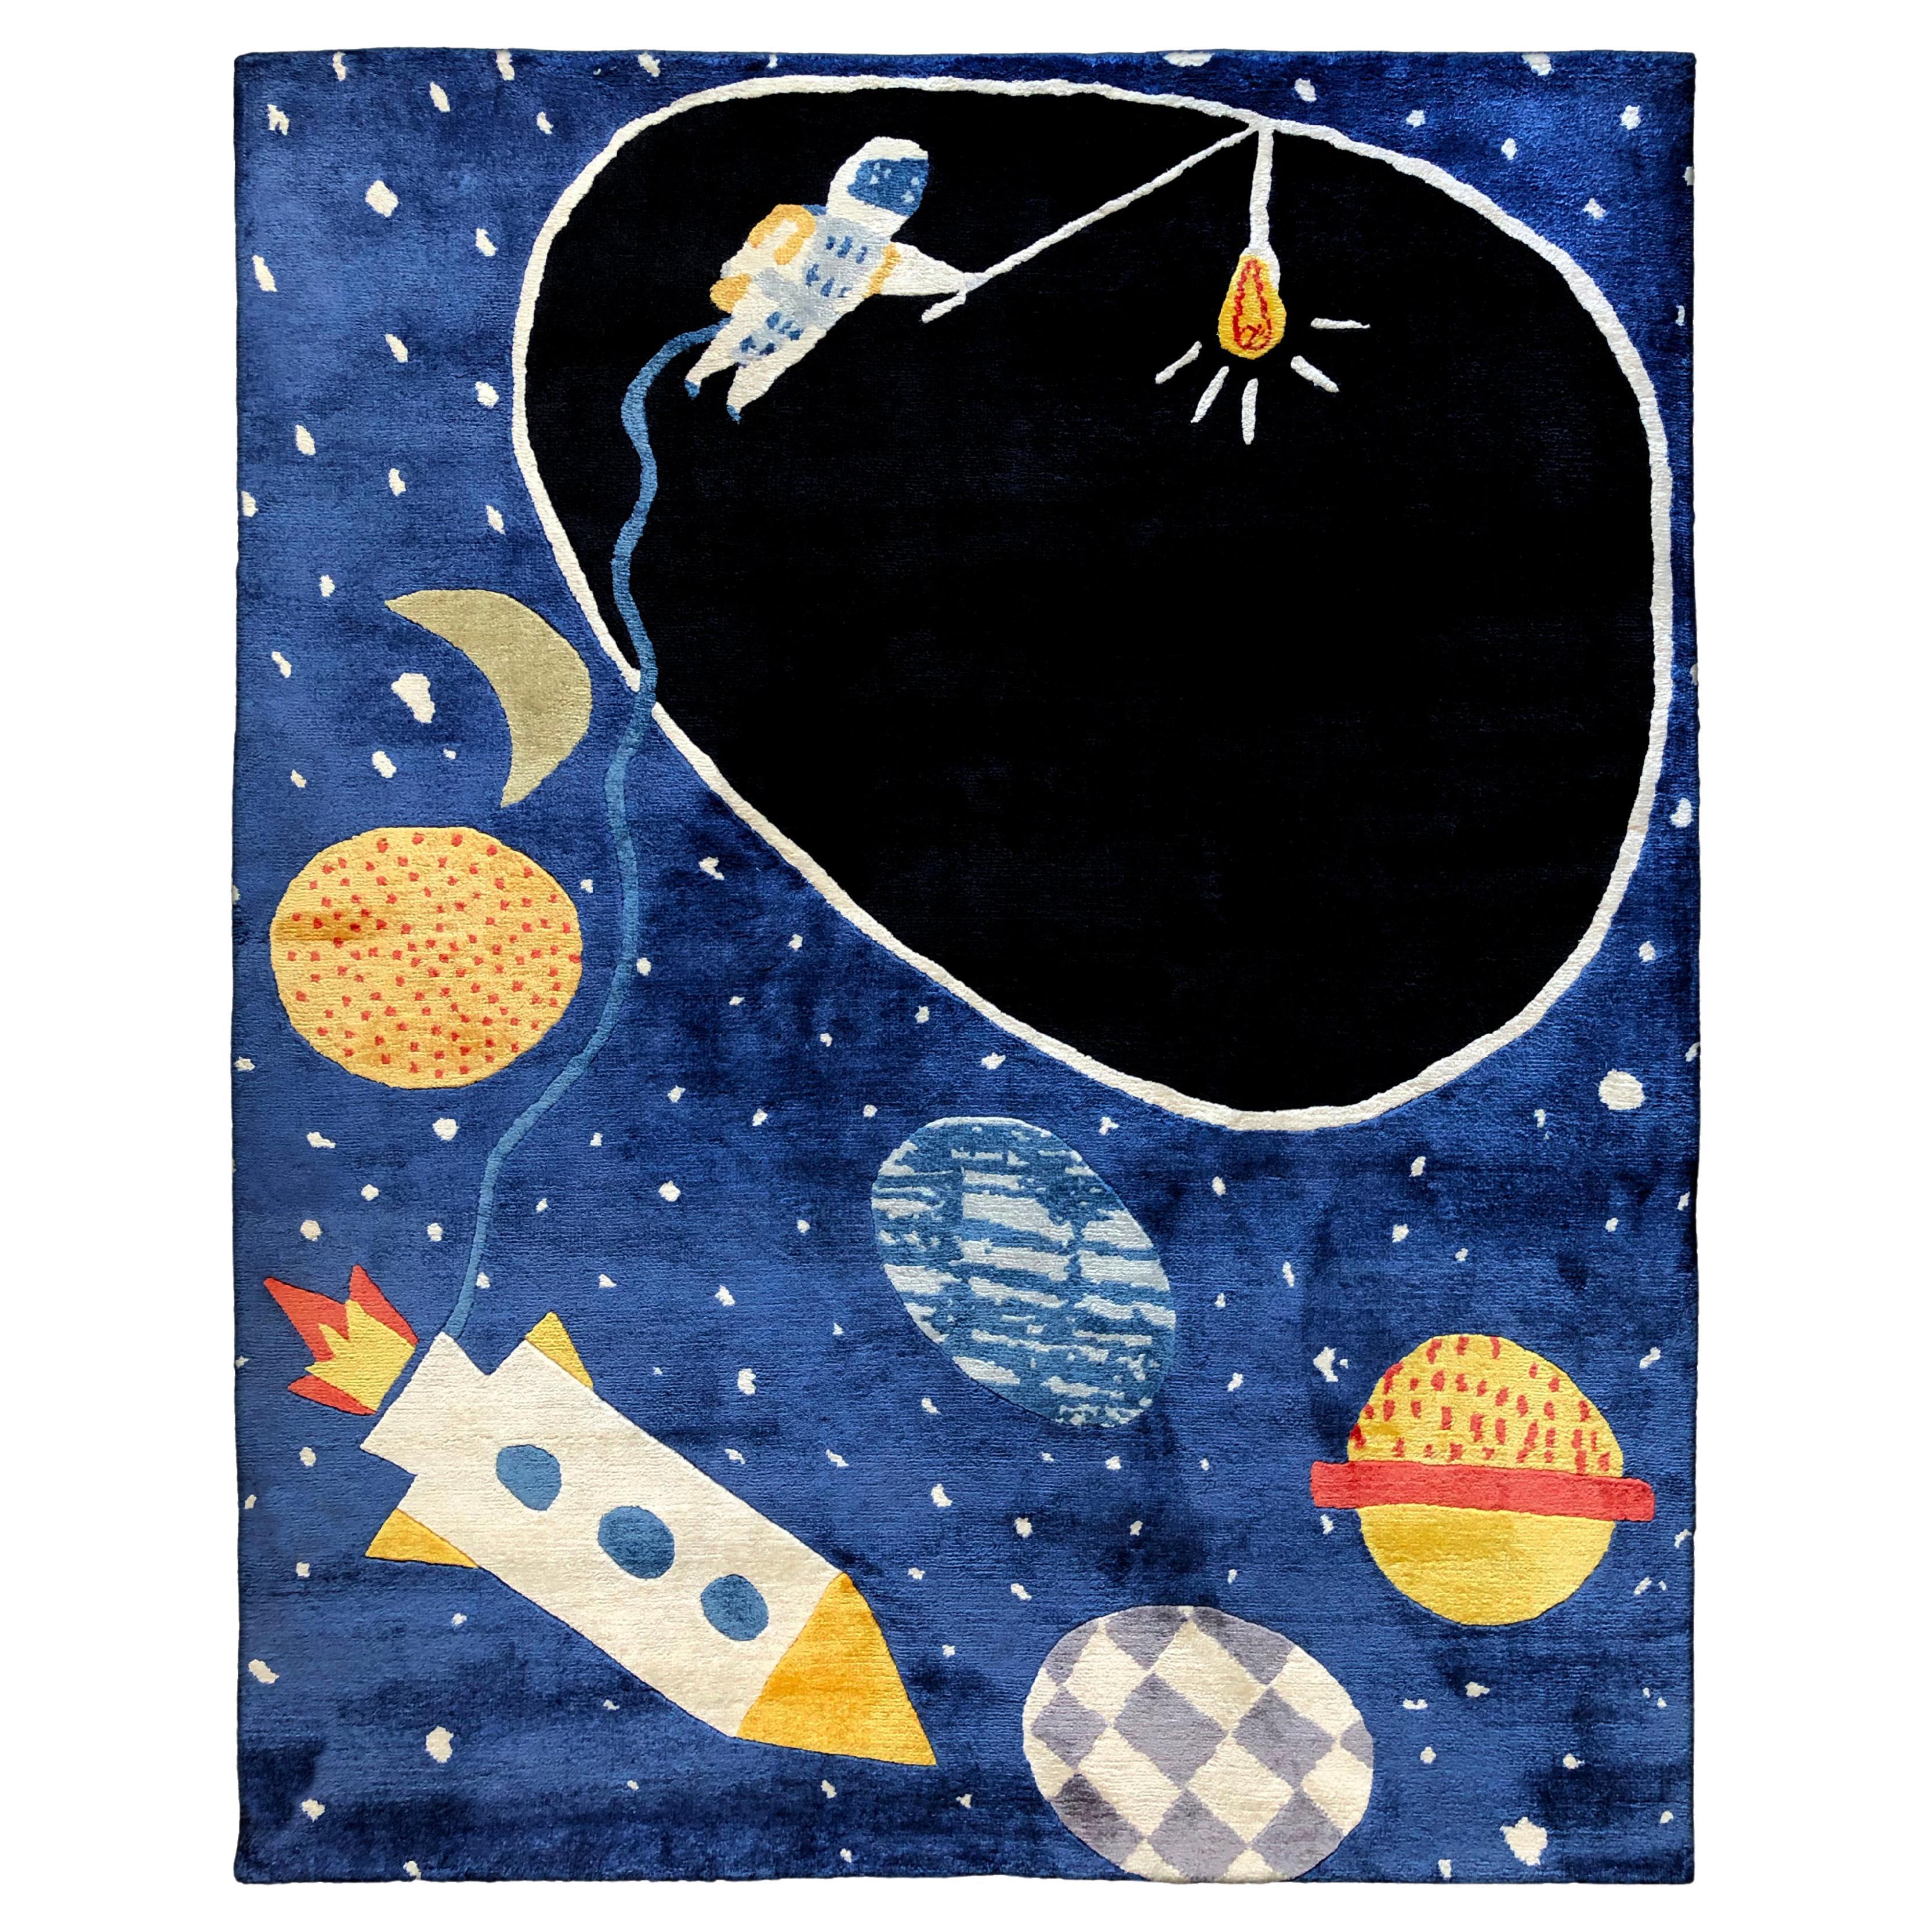 SPACE ACE RUG by Daria Solak, Hand Knotted, 100% New Zealand Wool 150 x 190 cm For Sale